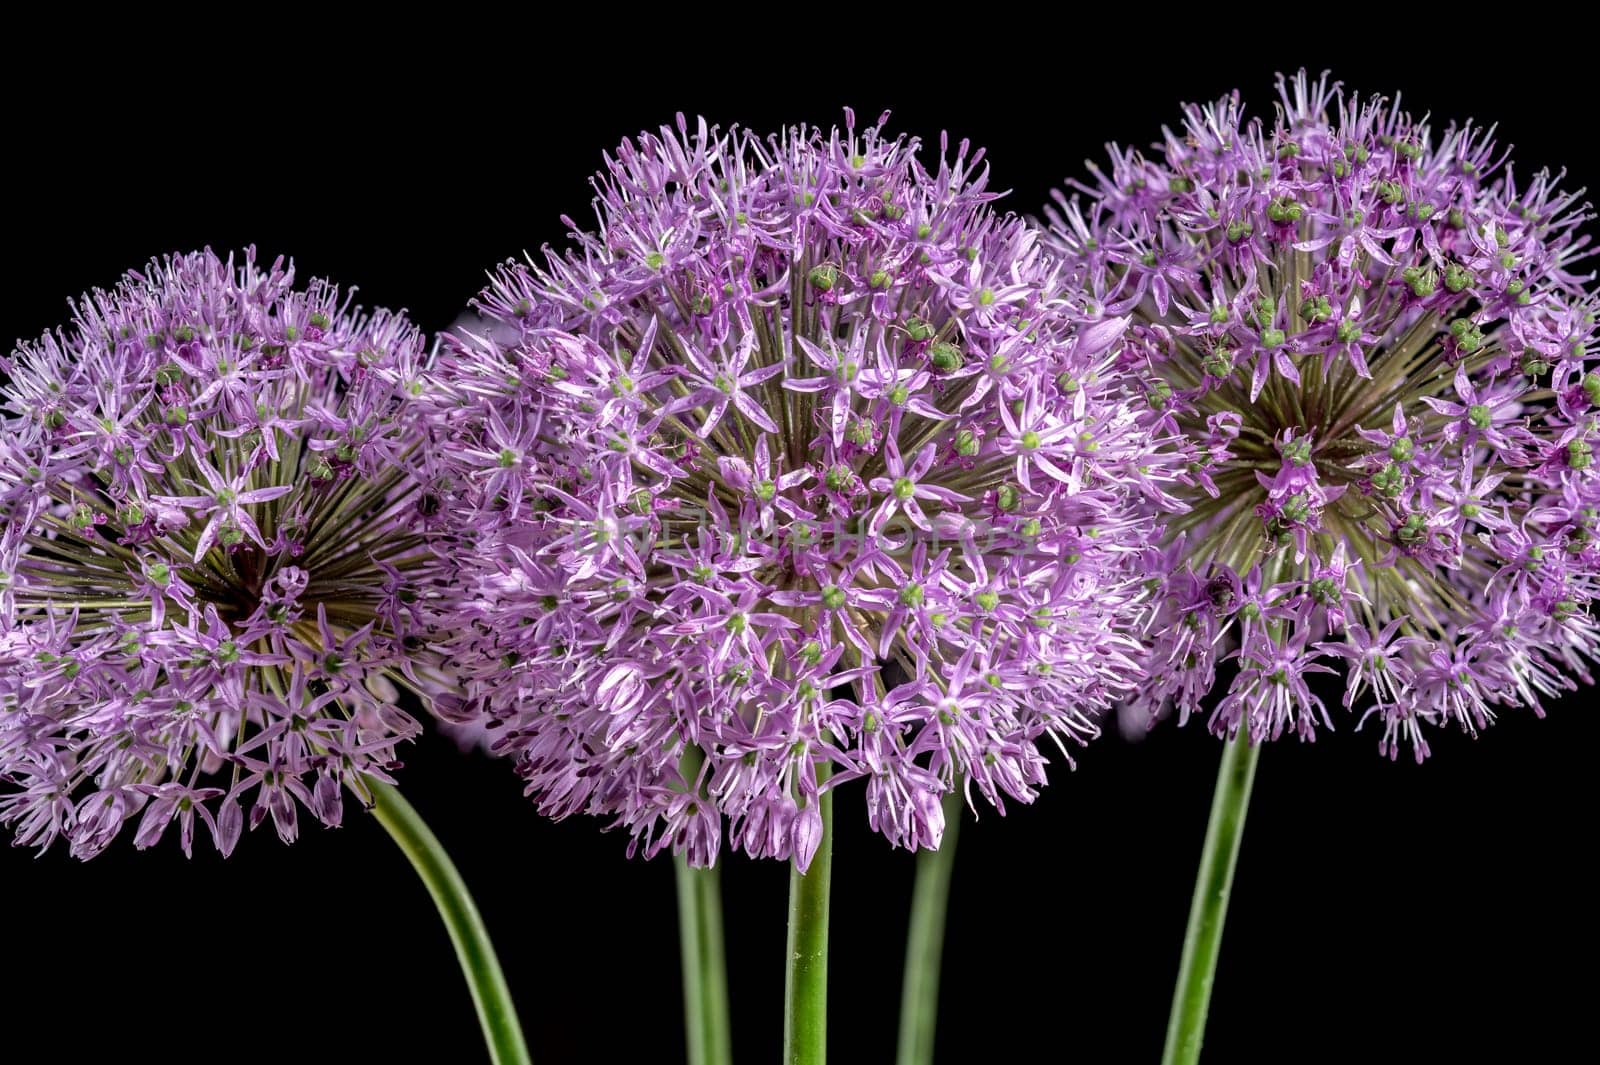 Blooming pink allium aflatunense on a black background by Multipedia